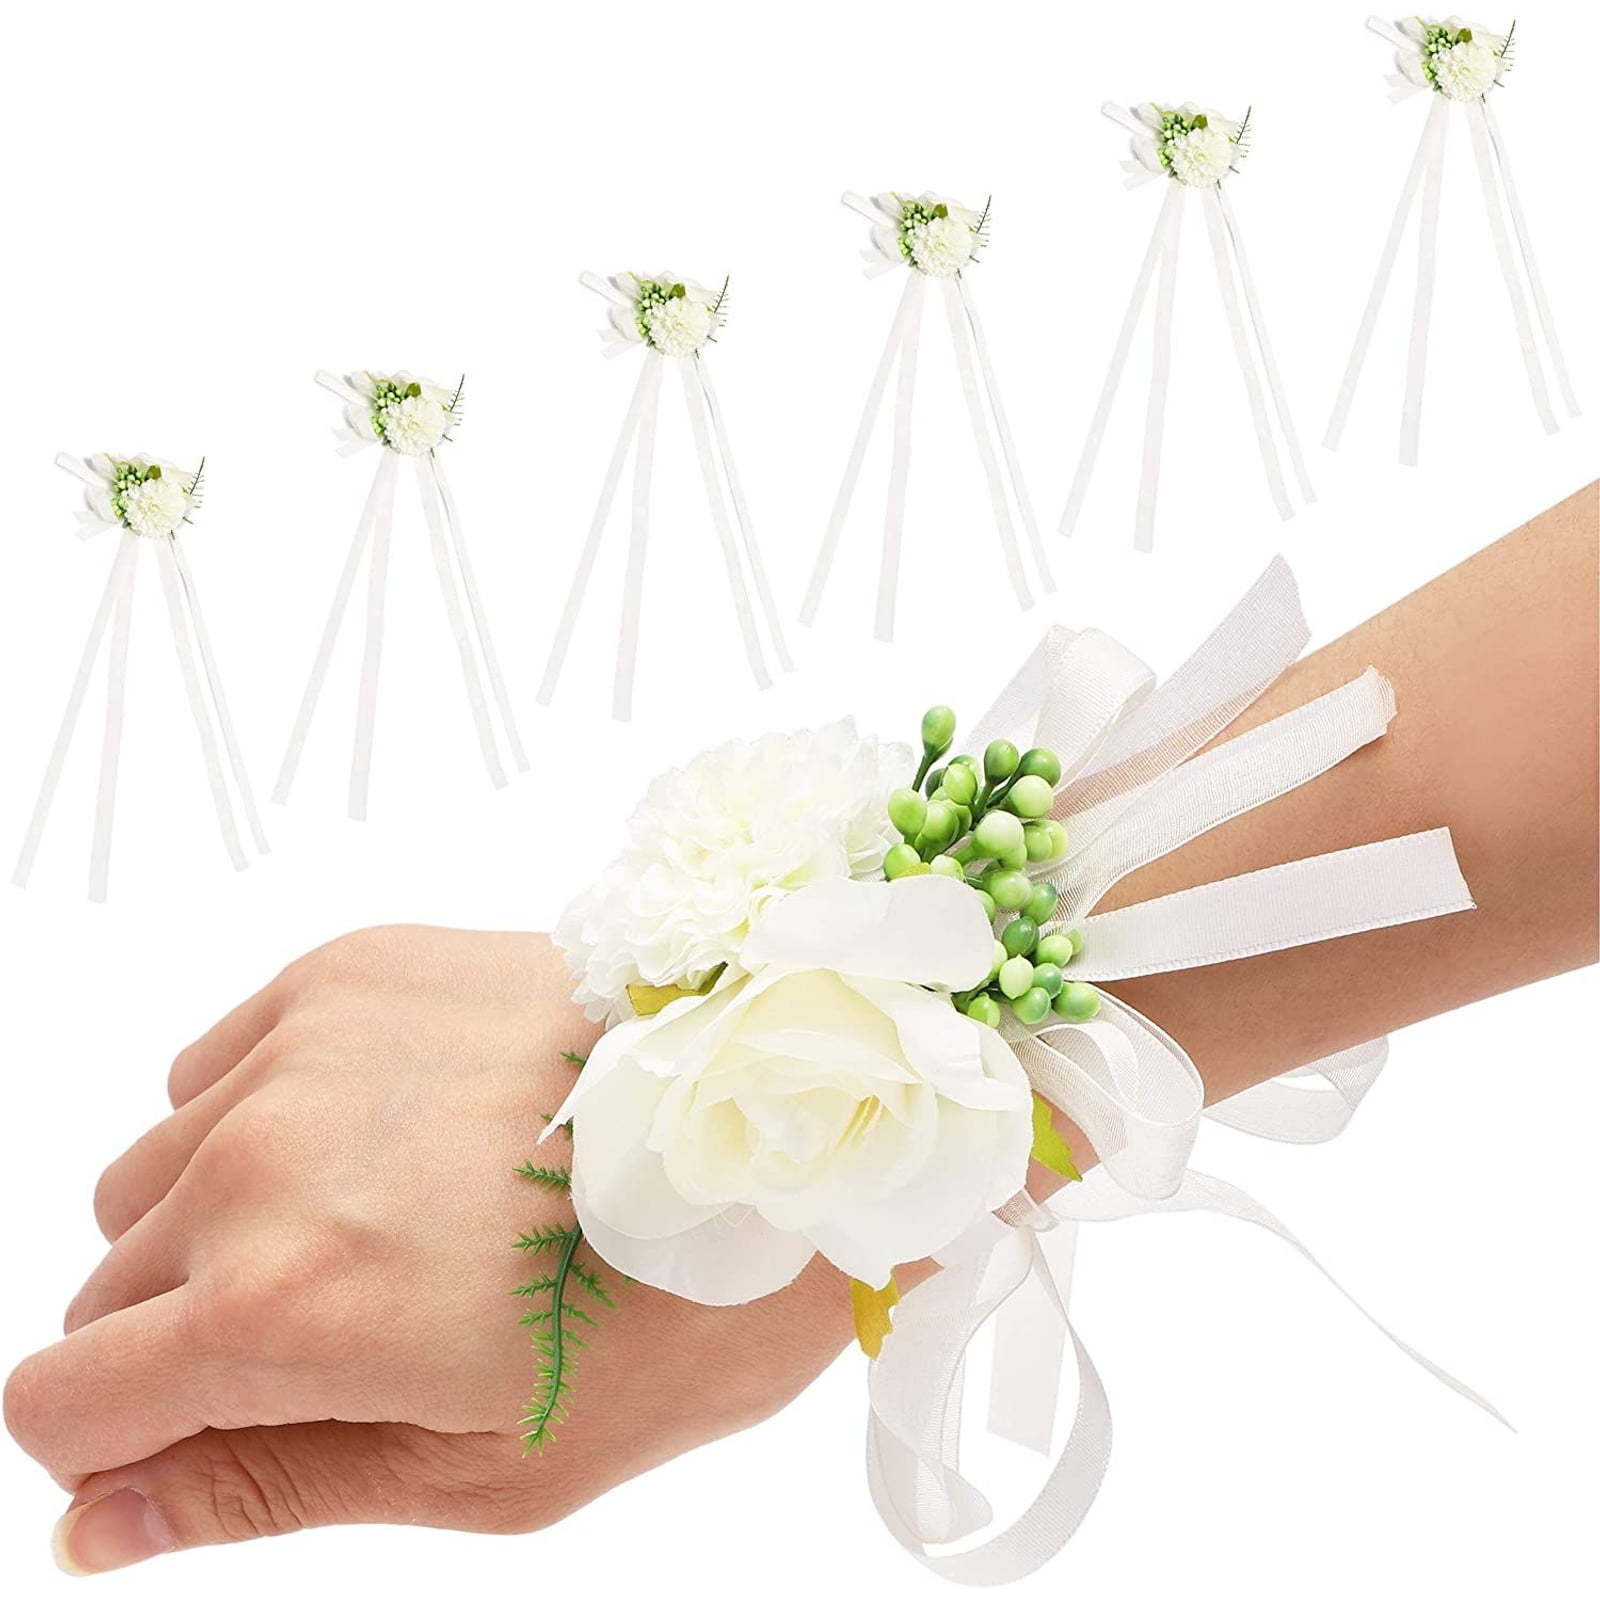 OASIS® wrap wristlets one size fits all for wrist corsage choice of colors 